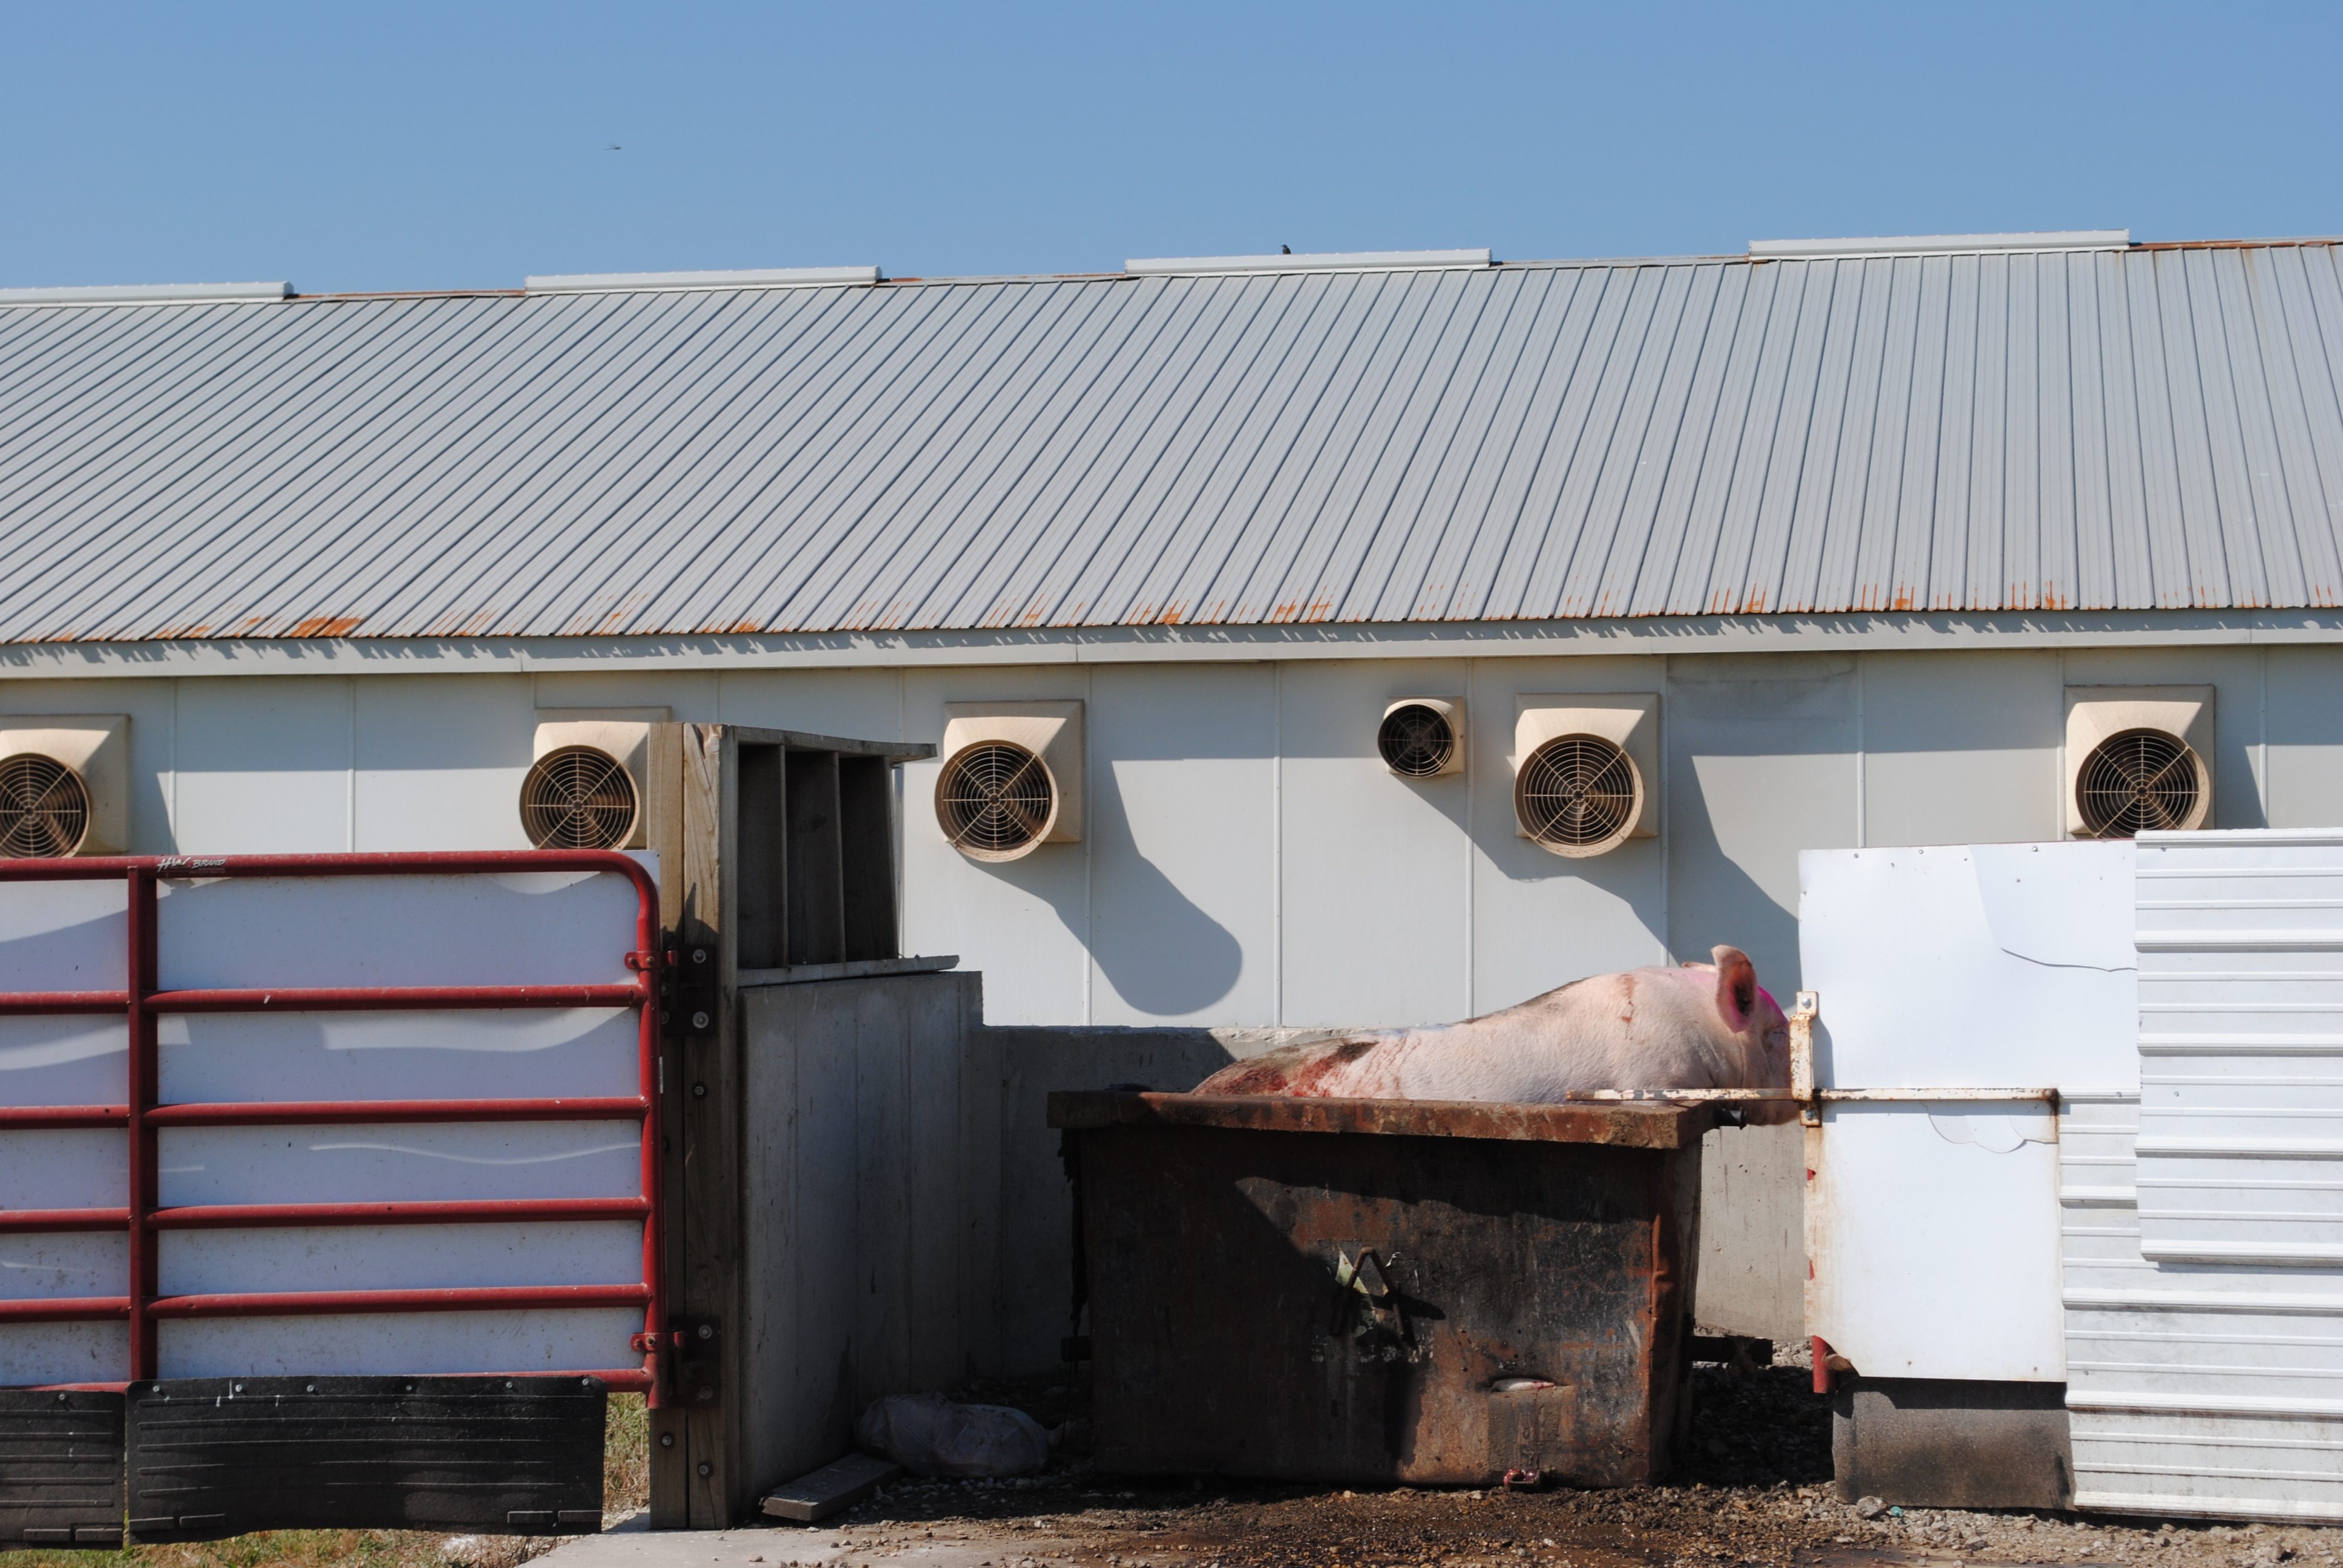 Animal welfare issue with pigs in dumpster at DeCoster barn in Iowa